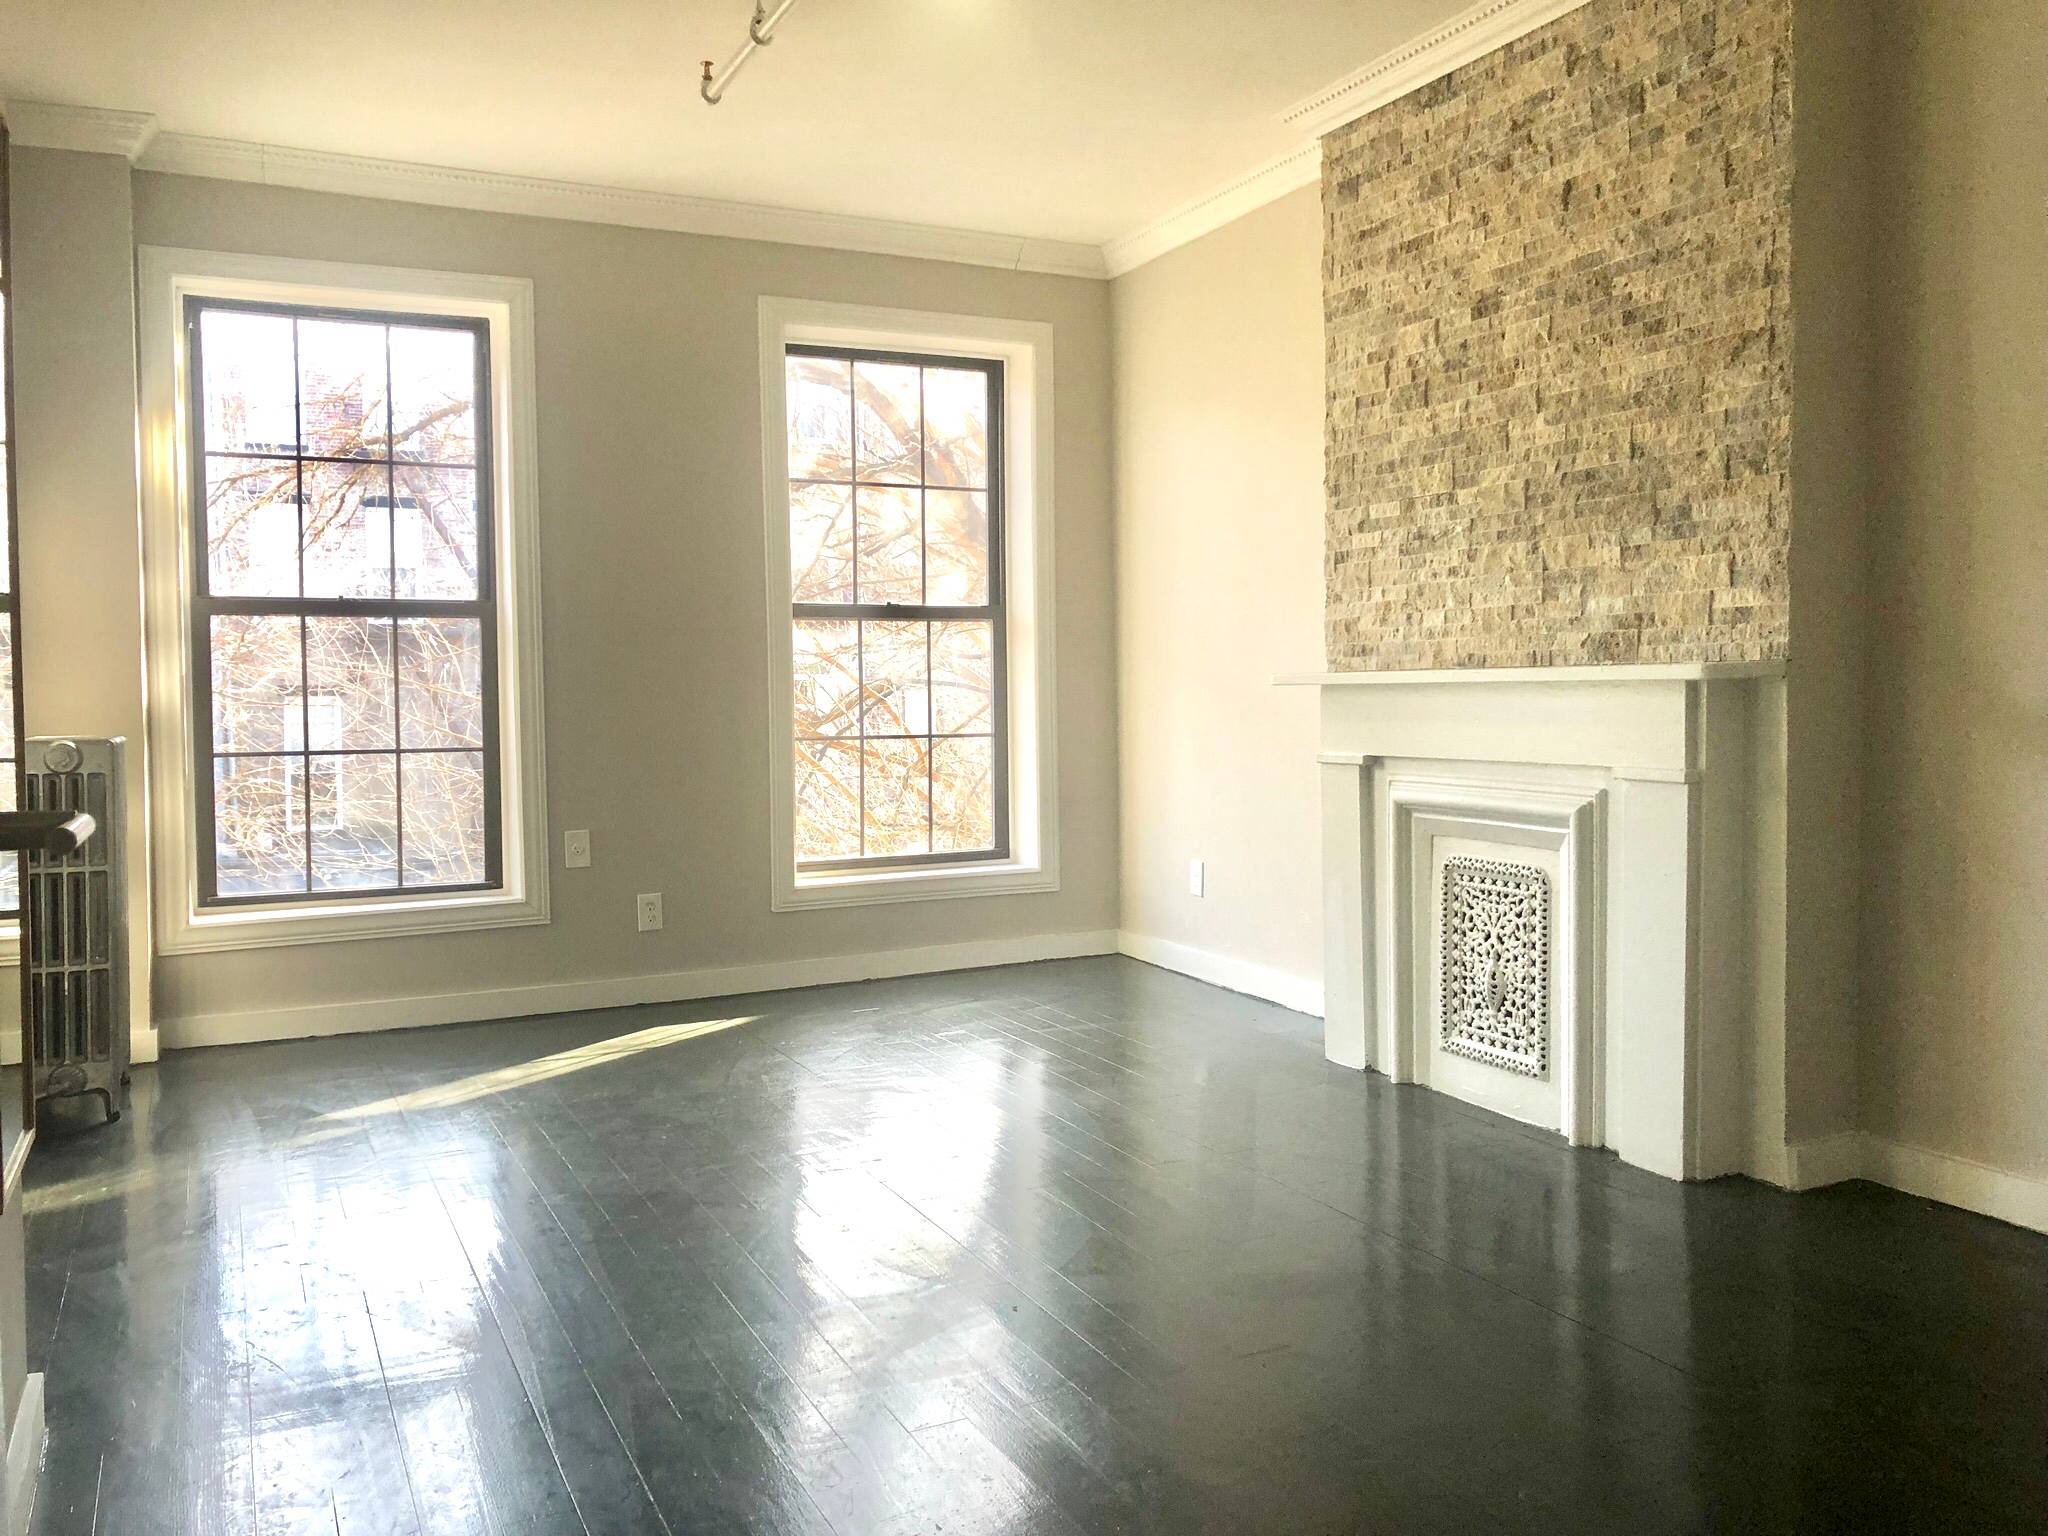 Newly Renovated NO FEE Condo Style Two Bedroom Rental Apartment On The Border of Clinton Hill And Bed Stuy!